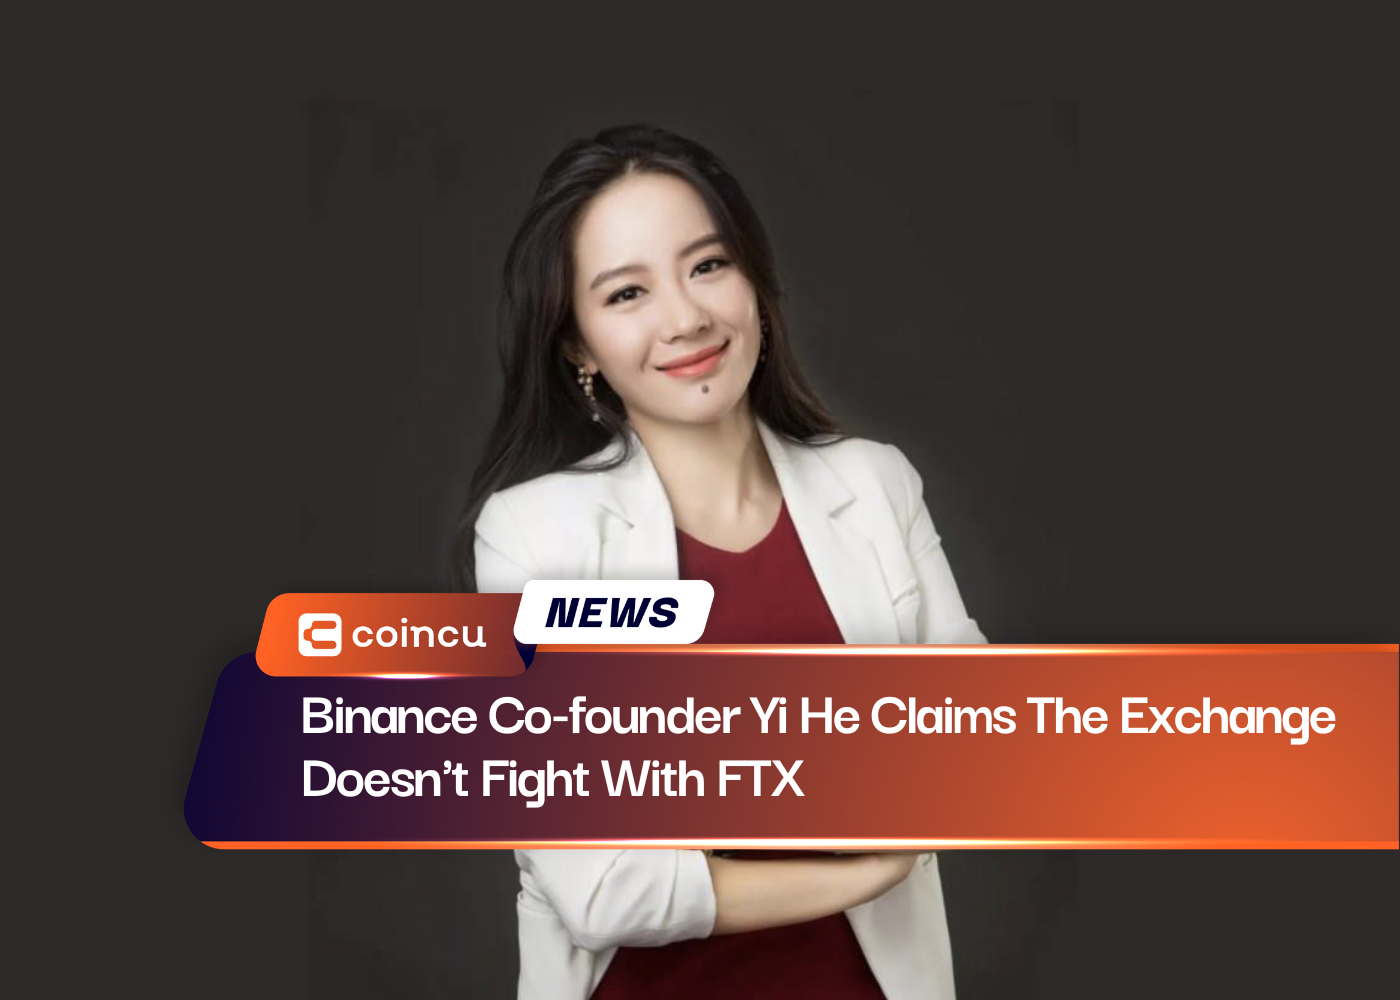 Binance Co-founder Yi He Claims The Exchange Doesn't Fight With FTX